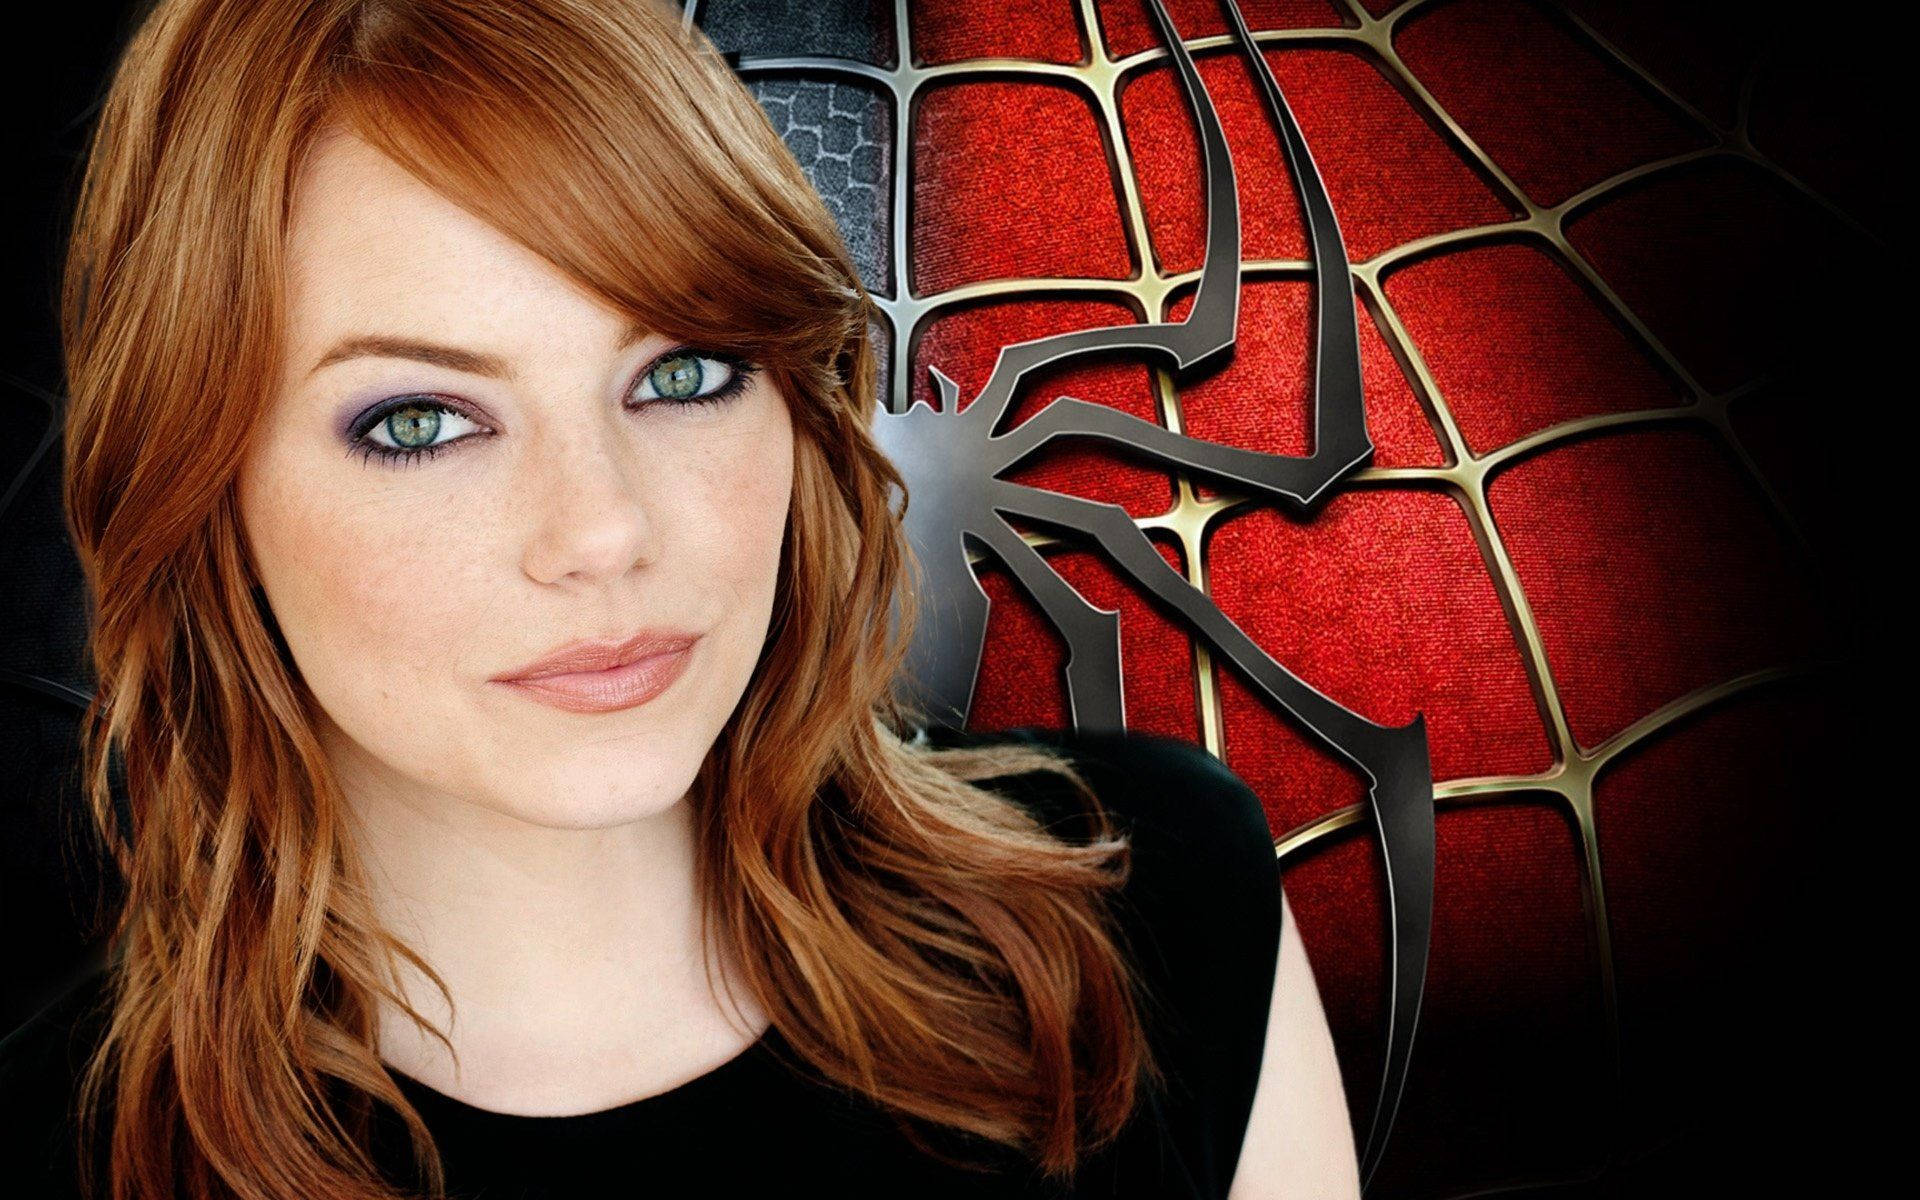 Emma Stone as Gwen Stacy in the critically acclaimed Spider-Man movie Wallpaper